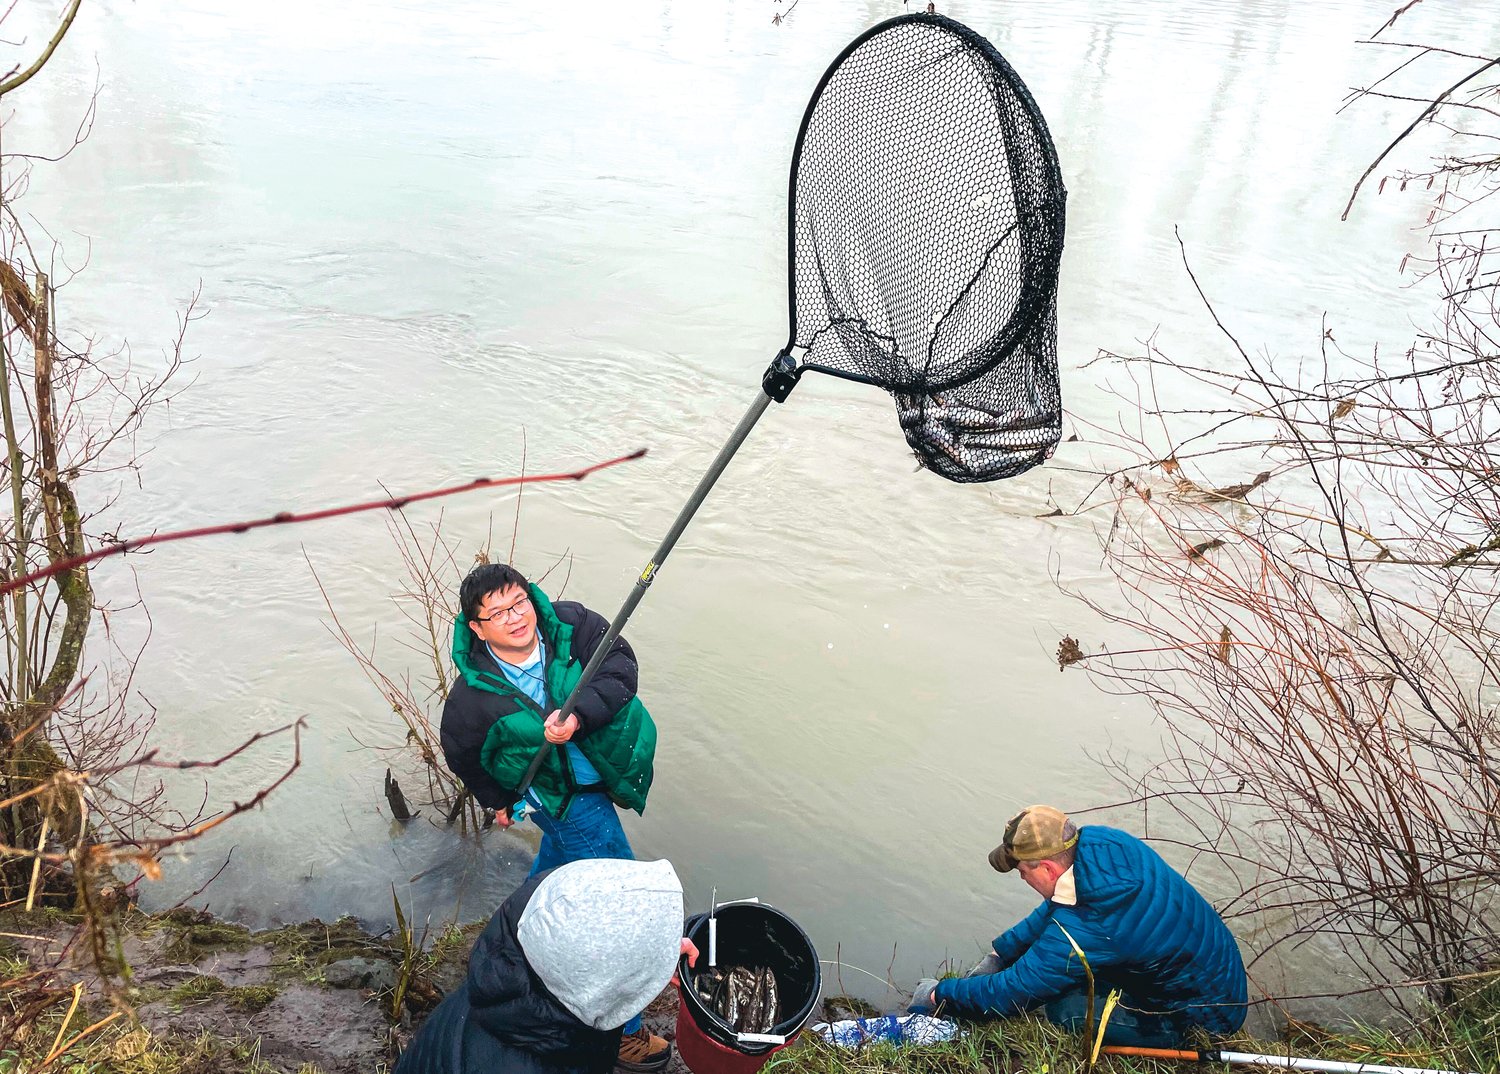 Danh Nguyen smiles while holding a net full of smelt on the bank of the Cowlitz River Saturday morning in Castle Rock.